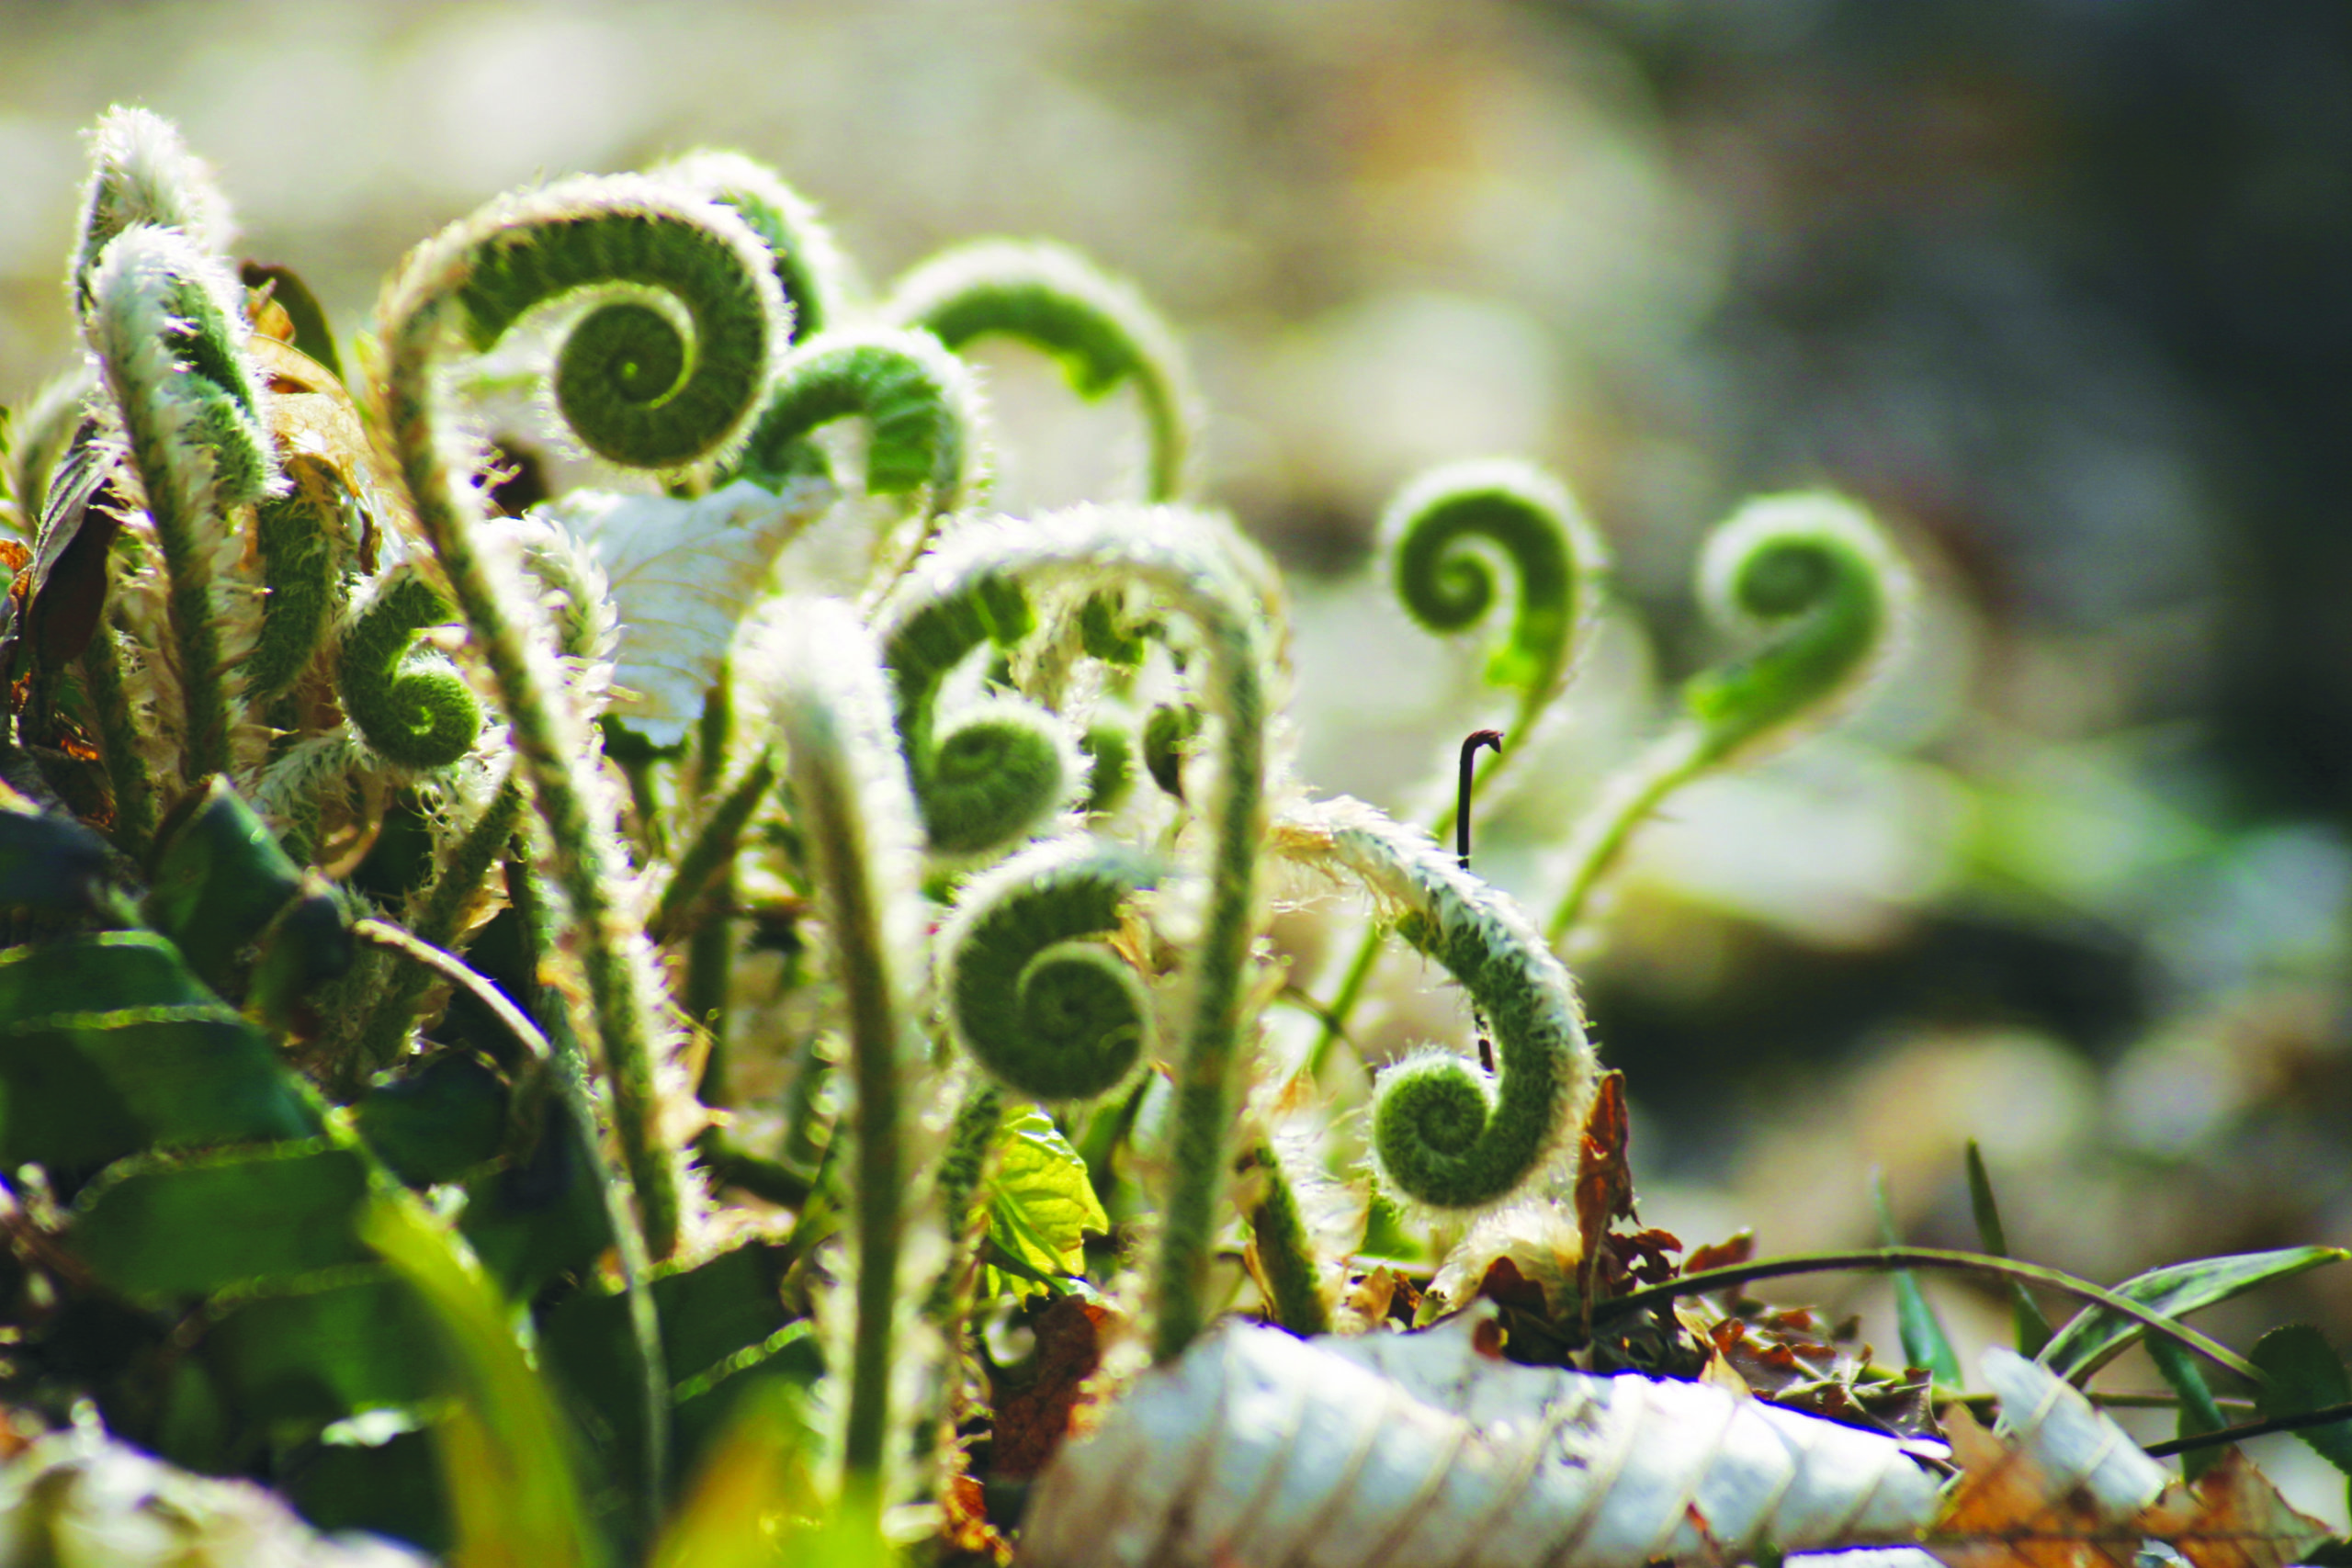 Small green fiddleheads of a fern, the plant's curled up fronds, are illuminated by bright light in the forest.